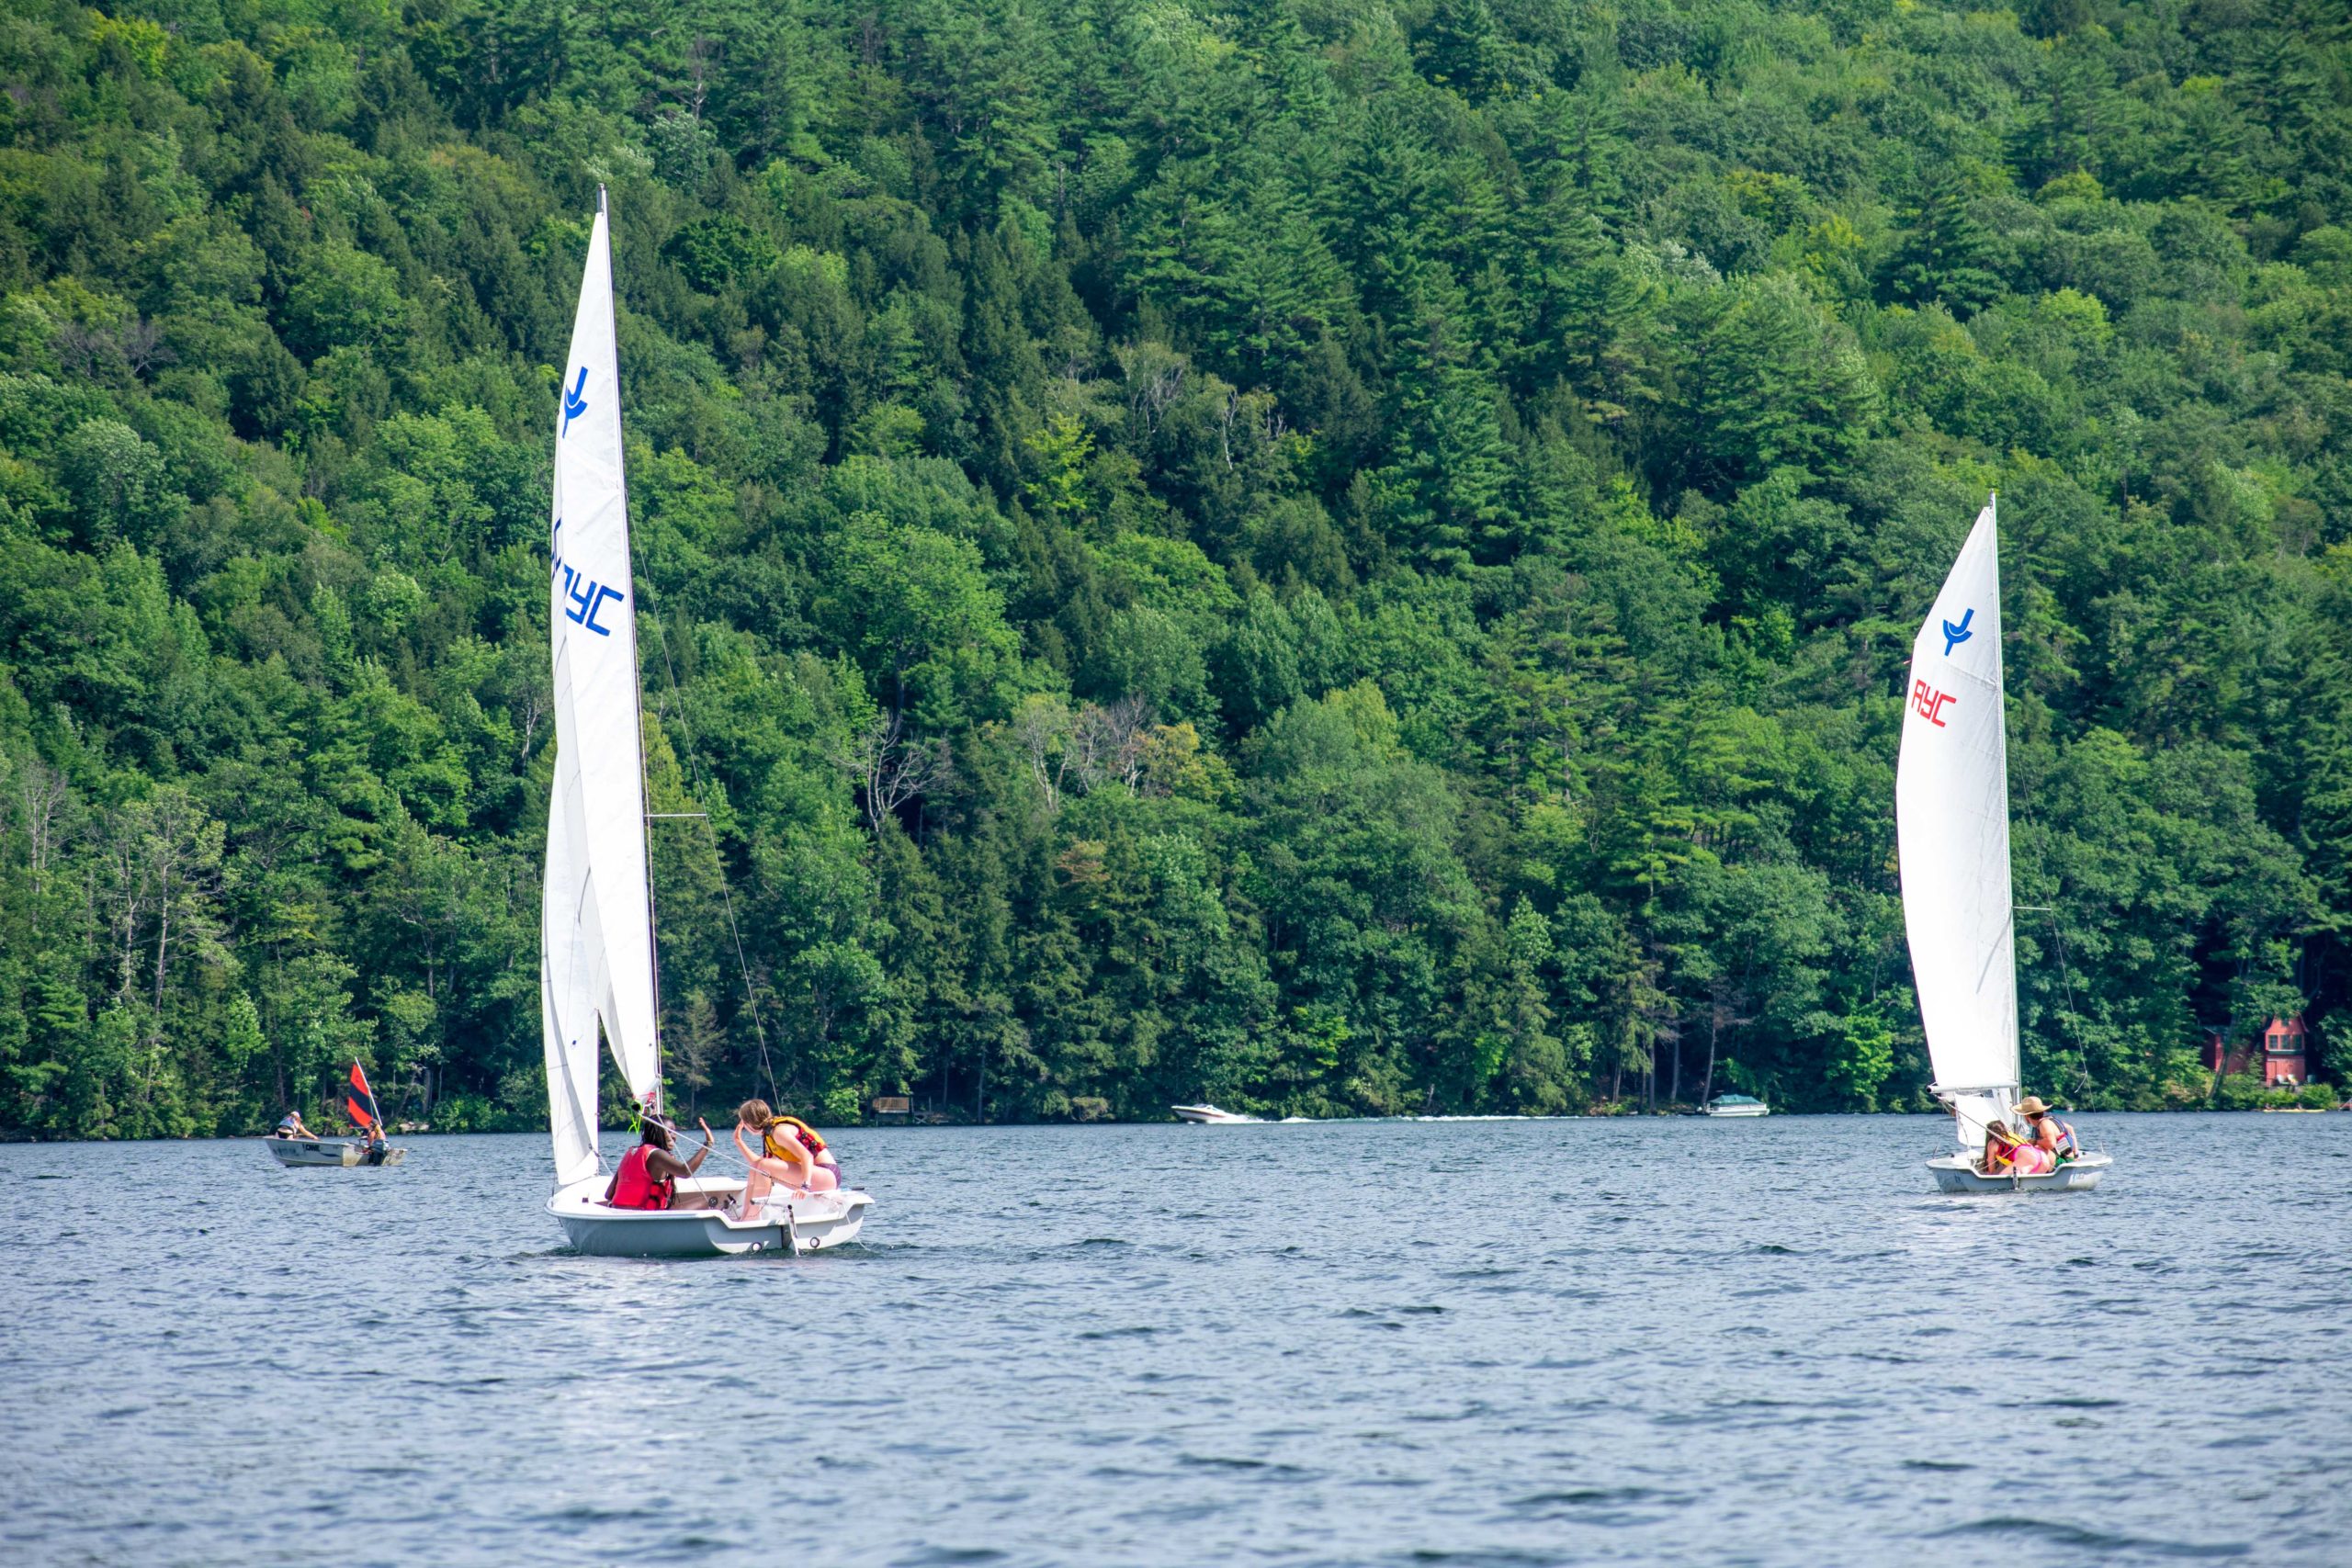 Campers learning how to sail.